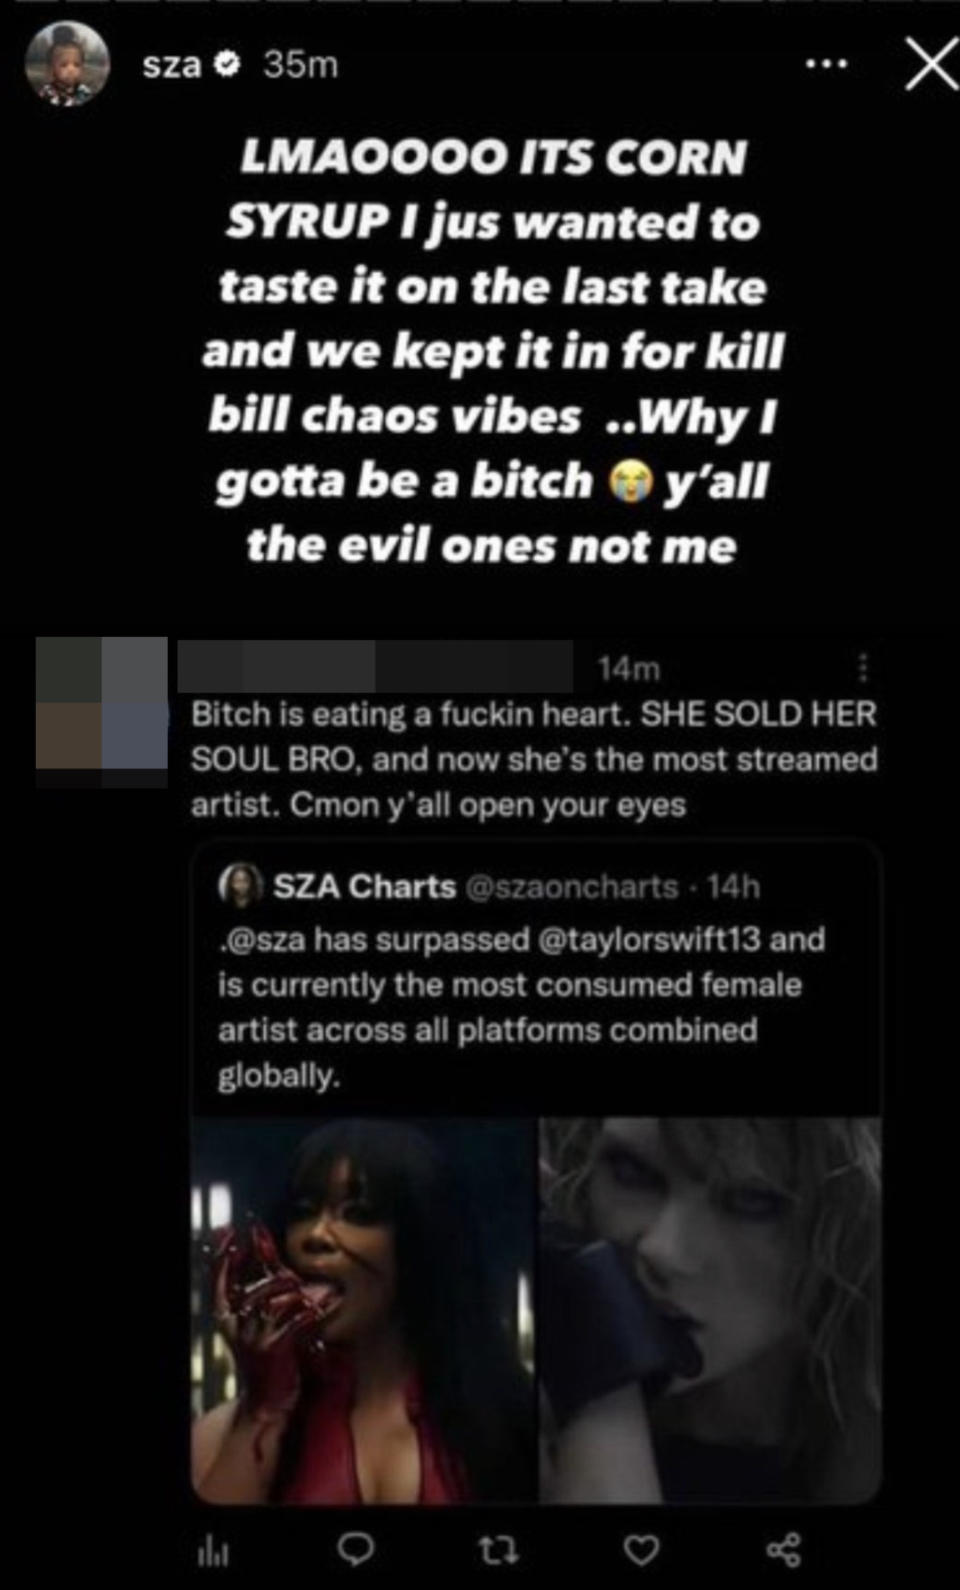 Person accuses her of eating a heart and selling her soul, and SZA says on her IG story that "it's corn syrup" and she just wanted to taste it on the last take and they kept it in for the "Kill Bill" chaos vibes, and says "y'all the evil ones not me"